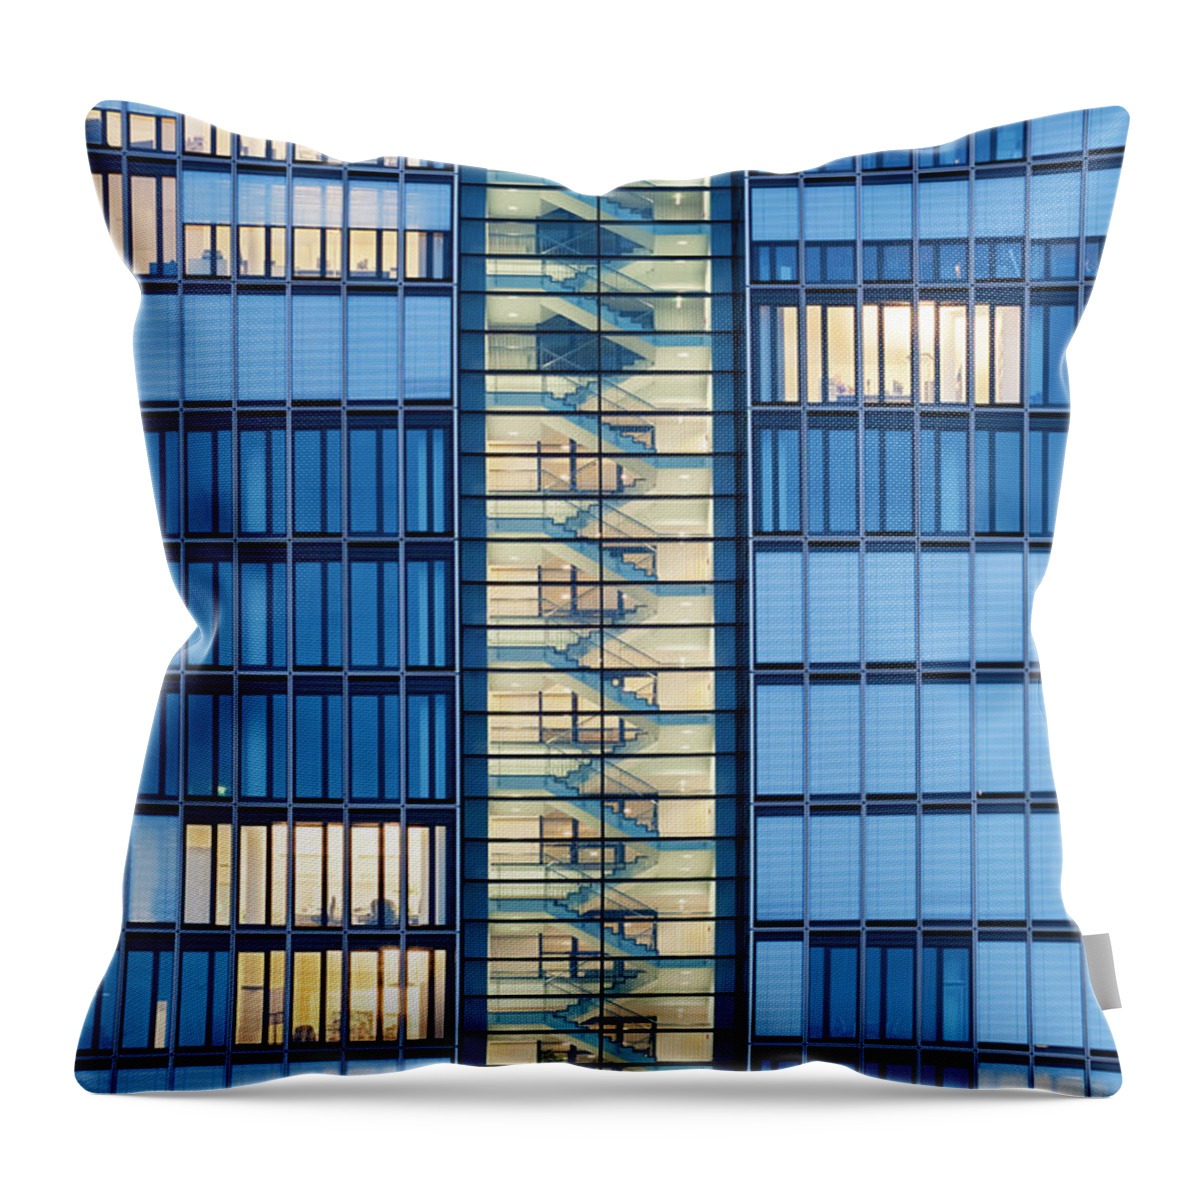 Part Of A Series Throw Pillow featuring the photograph Staircase In Office Building At Dusk by Jorg Greuel